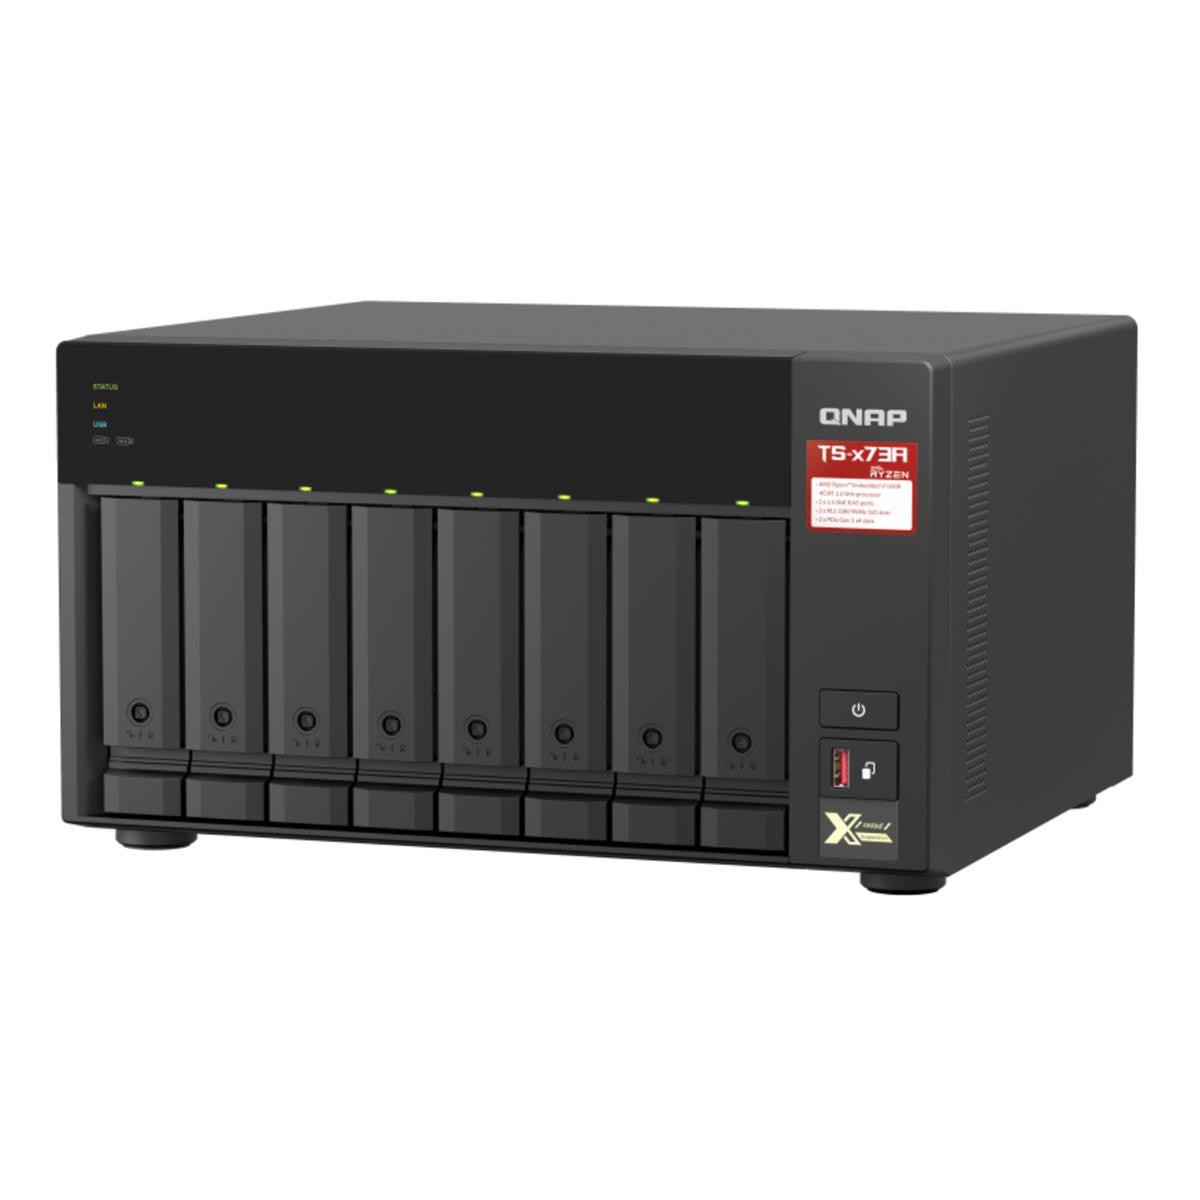 QNAP TS-873A 8-BAY NAS with 8GB DDR4 RAM and 24TB (8x3TB) Western Digital RED PLUS Drives Fully Assembled and Tested